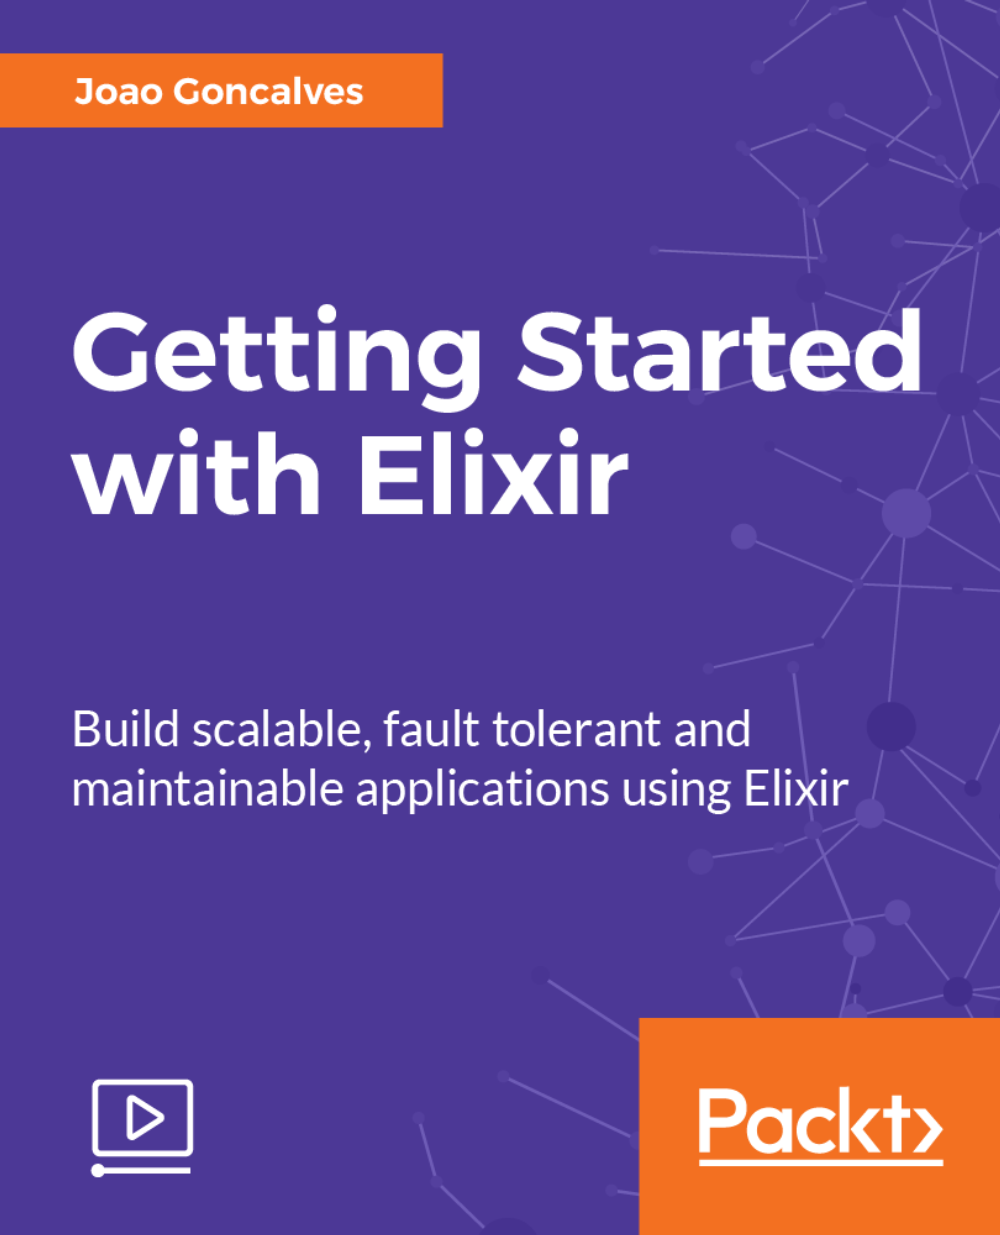 Getting Started with Elixir